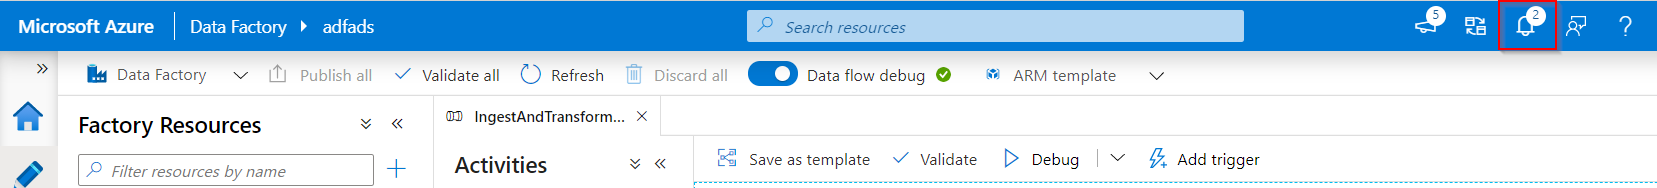 Bell button for notifications in Azure Data Factory